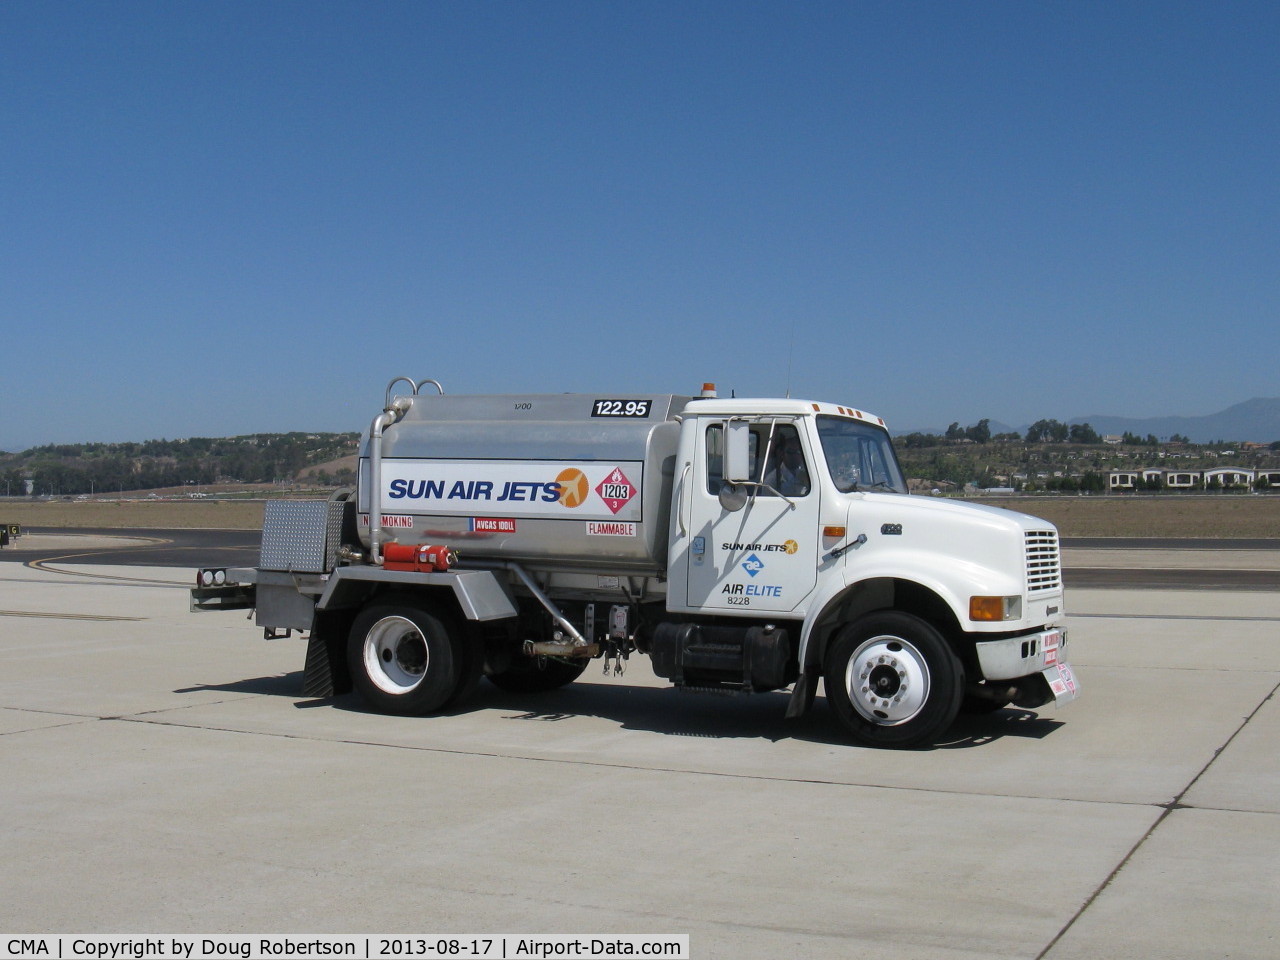 Camarillo Airport (CMA) - Mobile Fueler of SUN AIR JETS, monitors 122.95. One of several fuel providers at CMA.